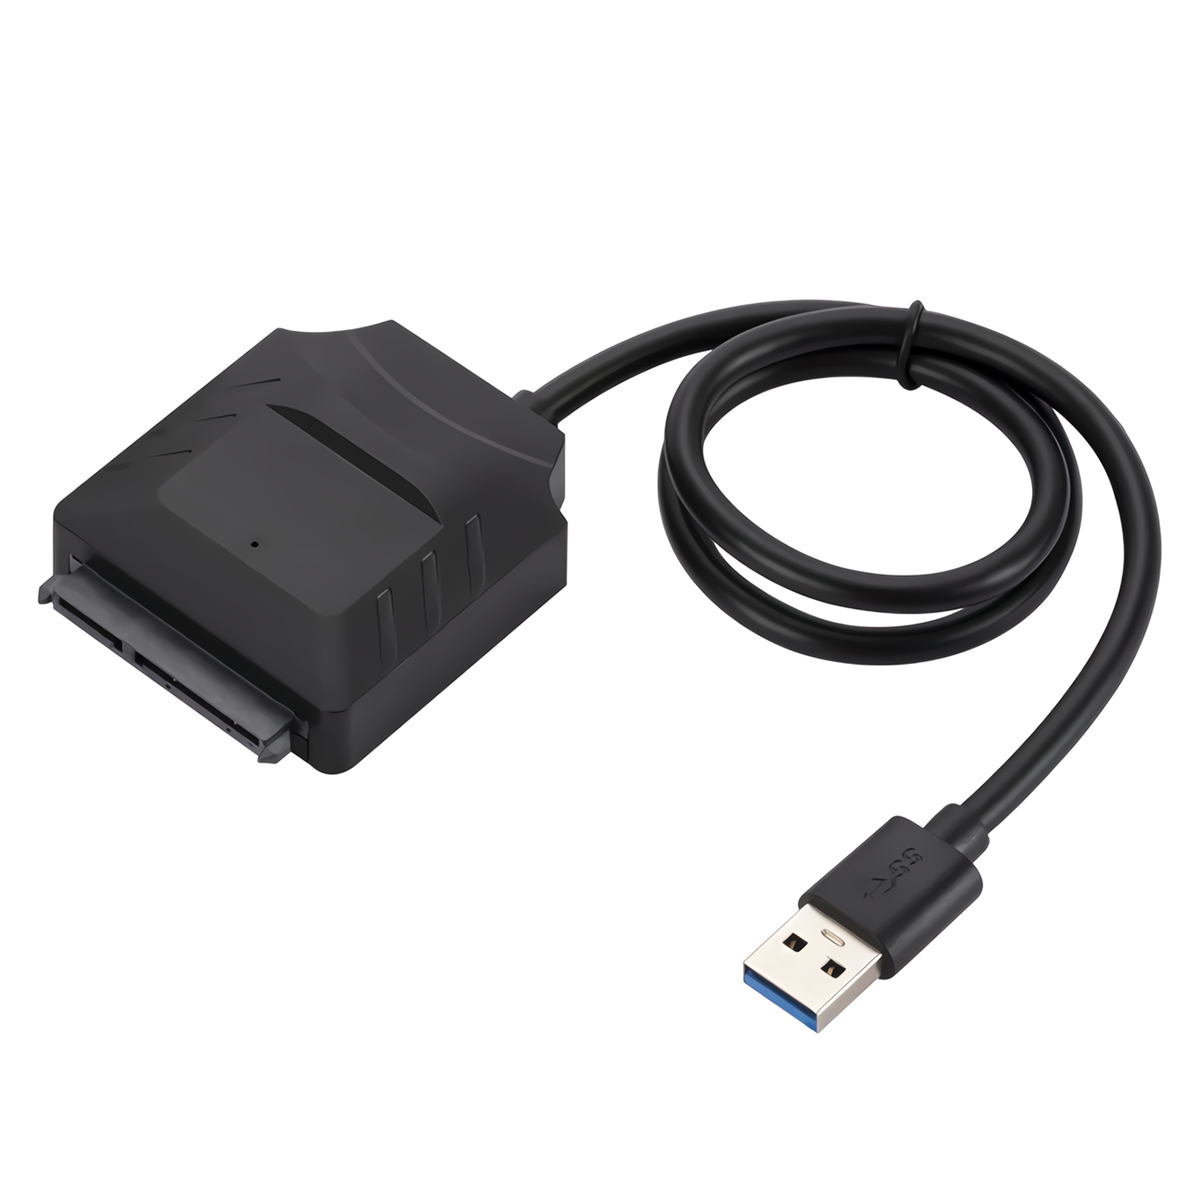 MnnWuu SSD HDD USB 3.0 to SATA Converter Cable Hard Drive Converter Adapter Support 2.5 / 3.5" HDD S